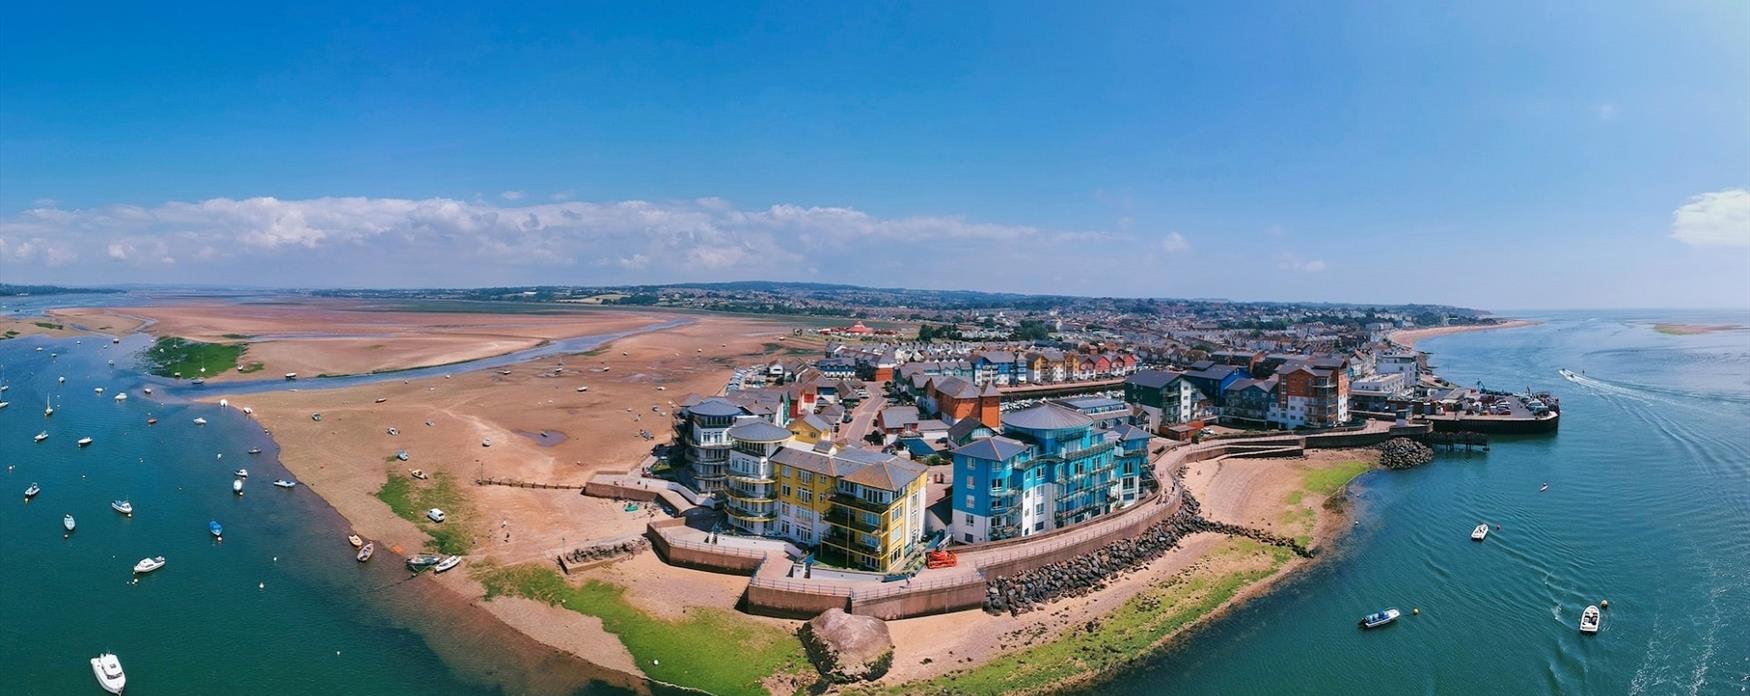 Panoramic view over Exmouth and the Exe Estuary